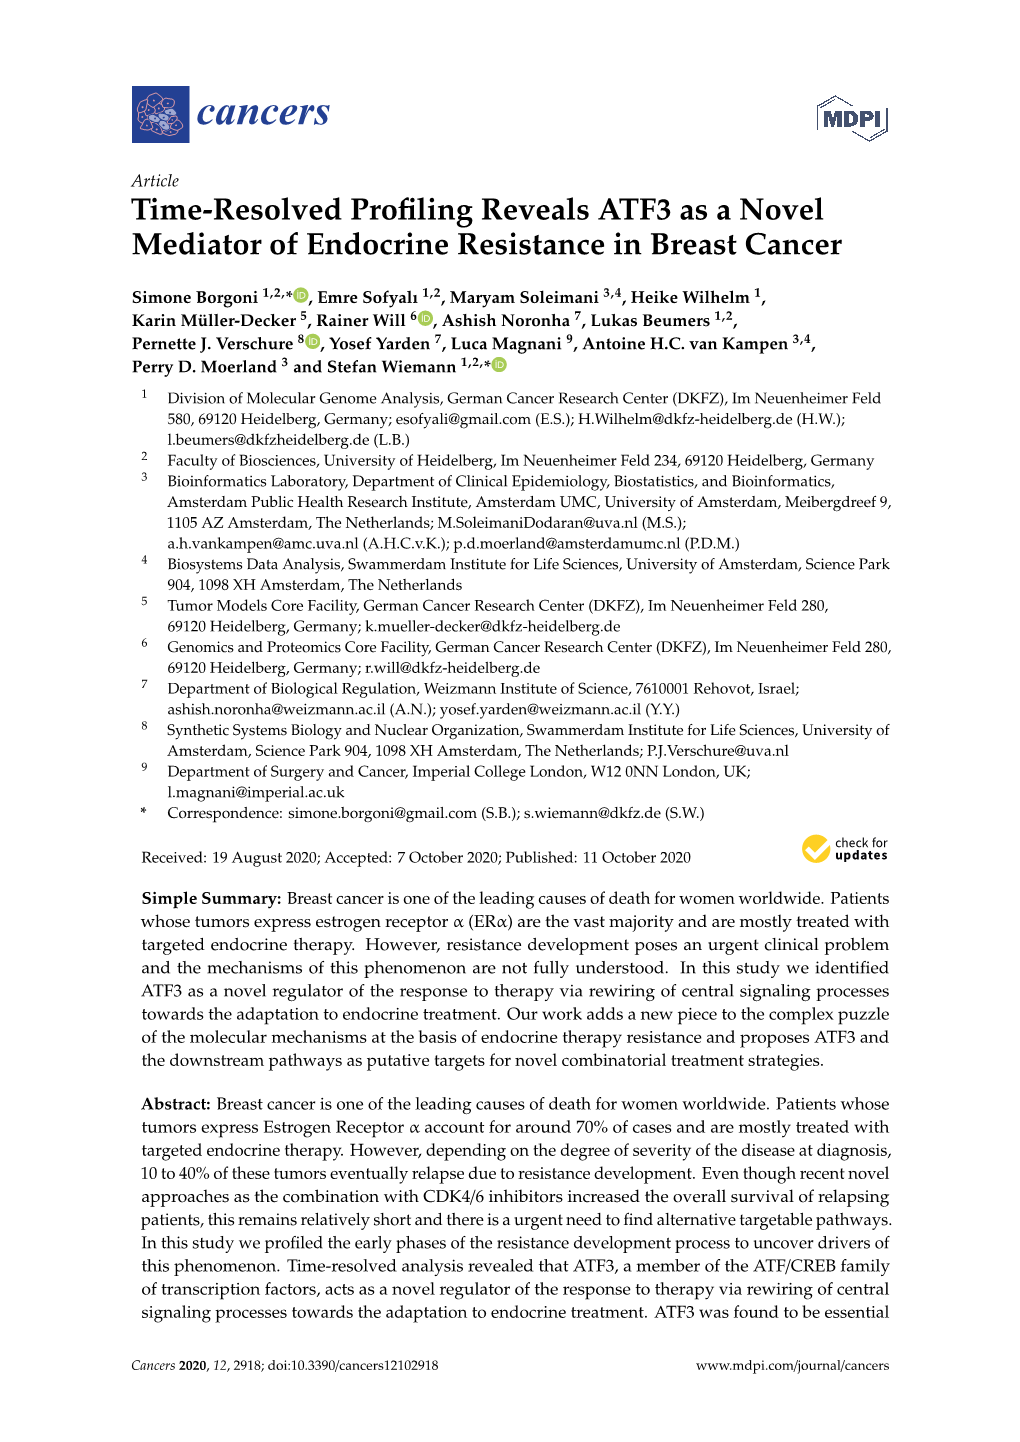 Time-Resolved Profiling Reveals ATF3 As a Novel Mediator of Endocrine Resistance in Breast Cancer